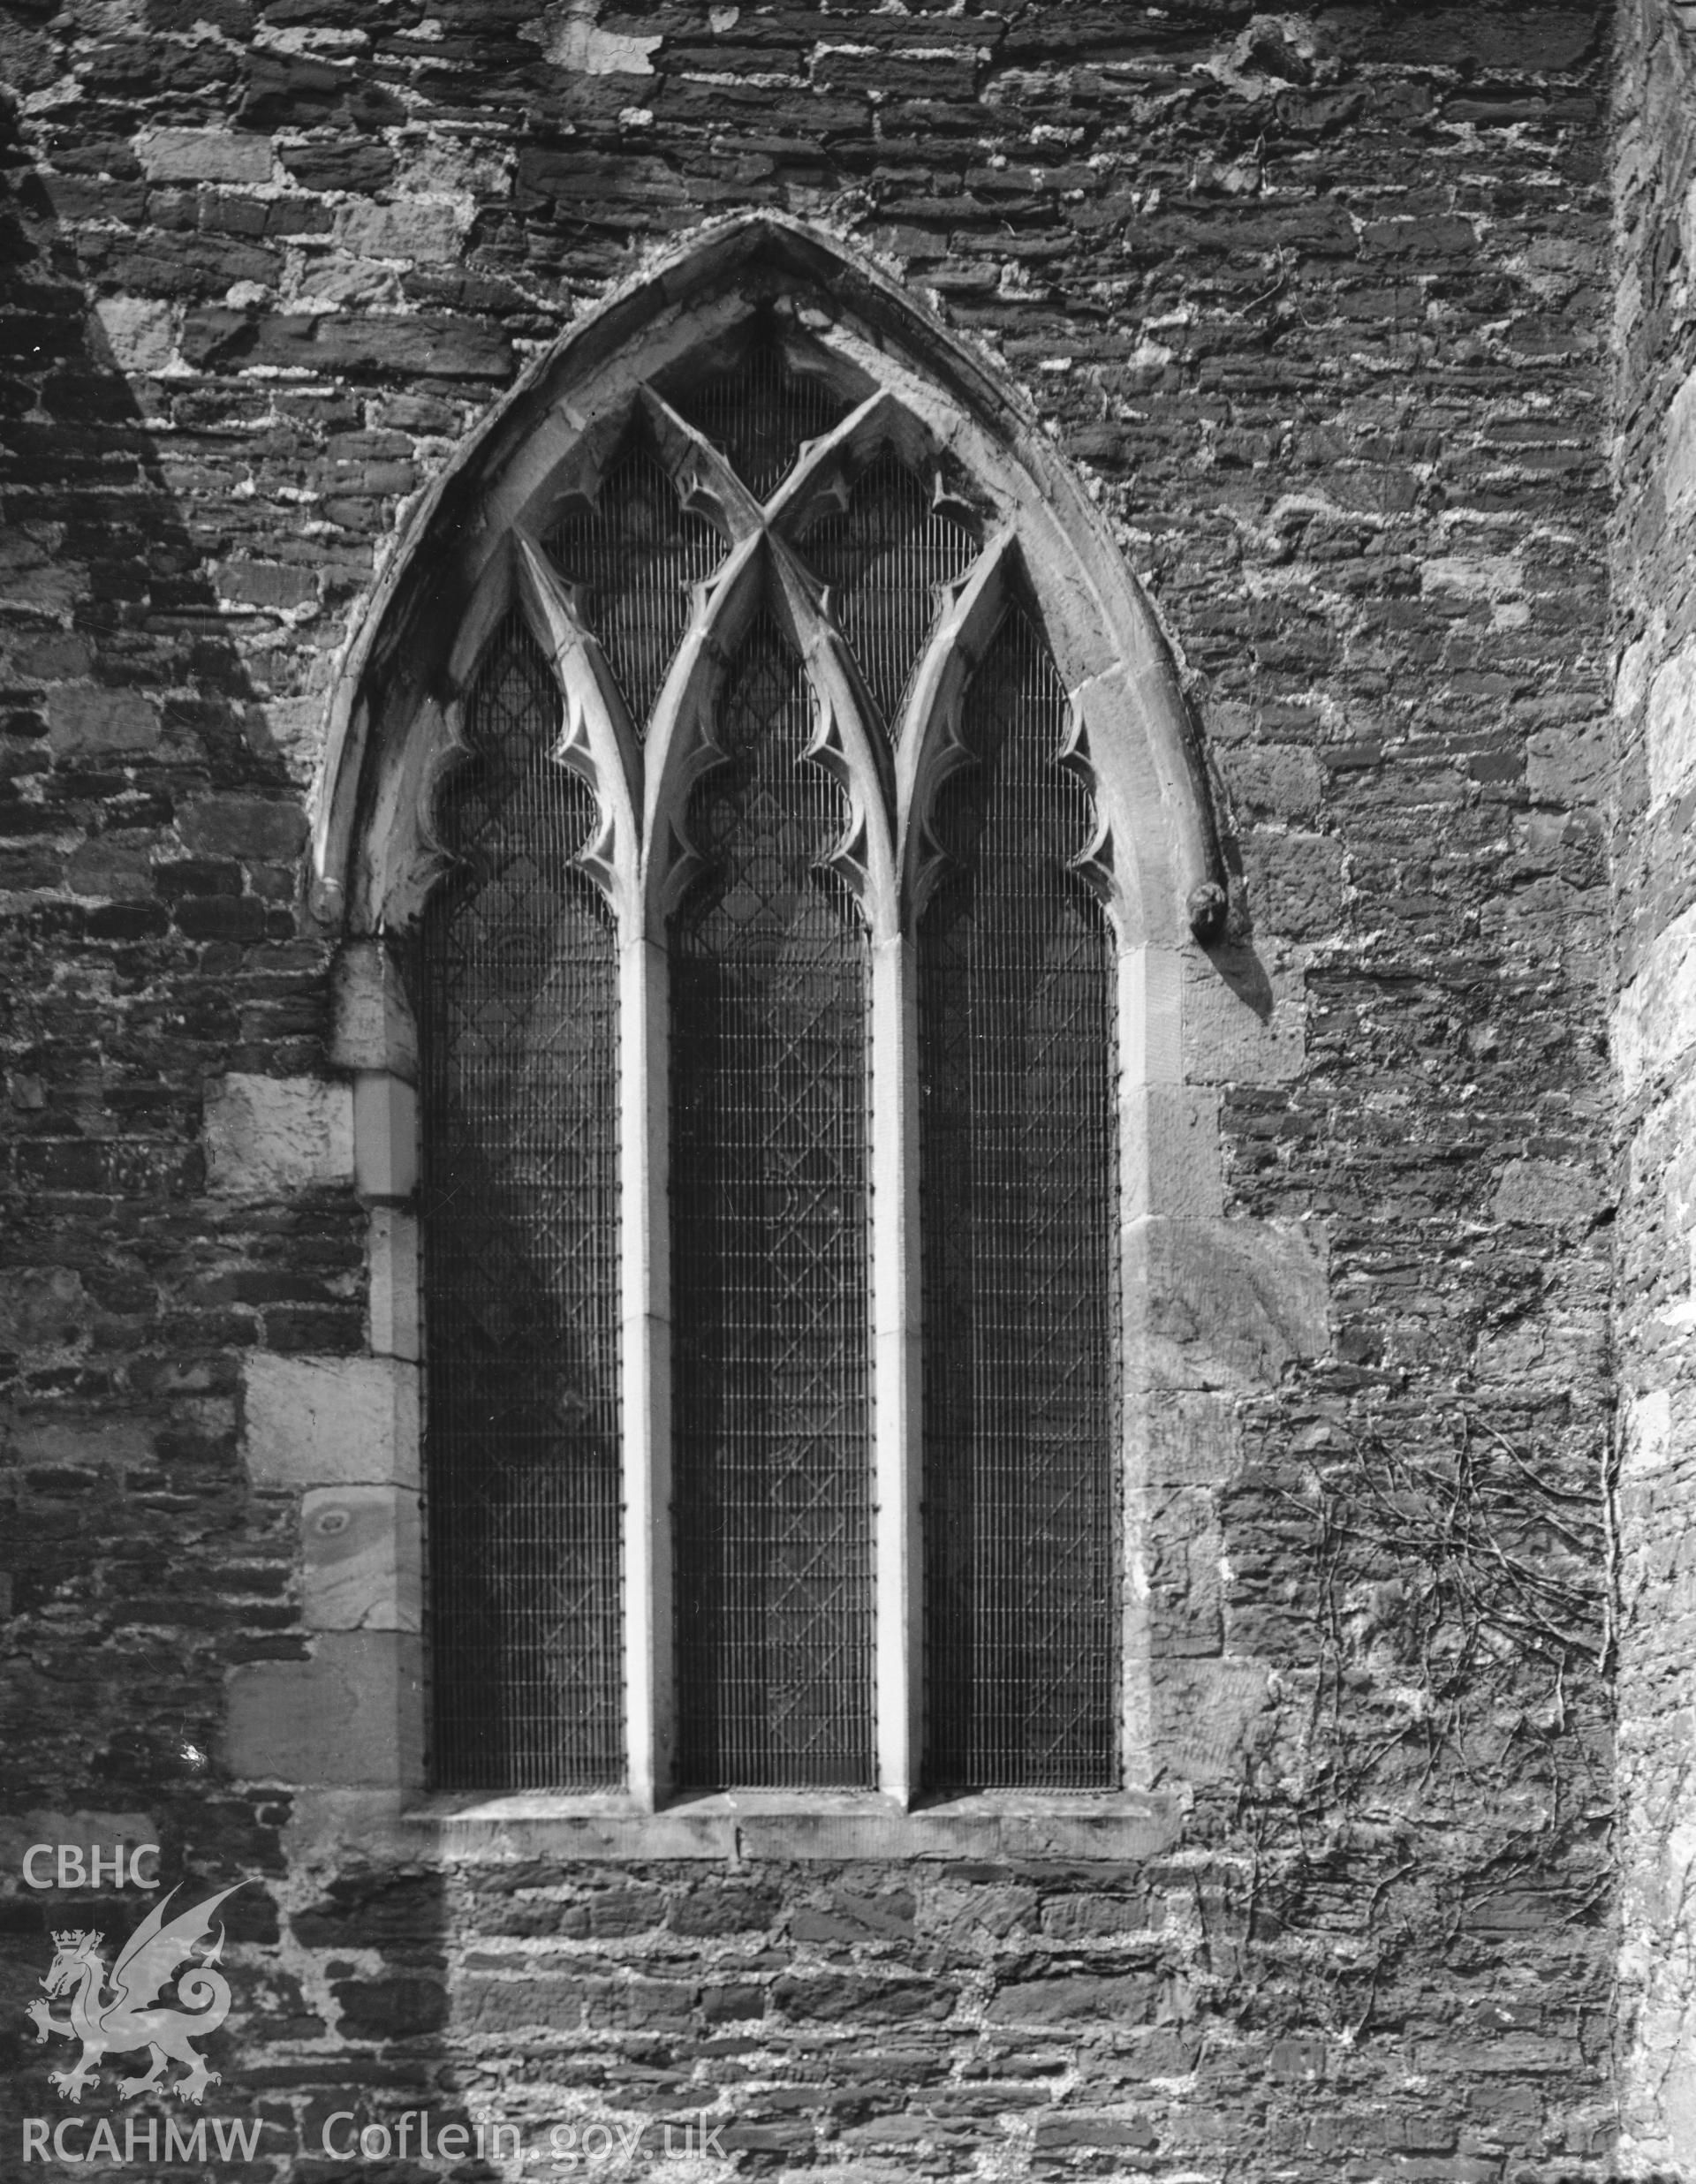 Exterior view of window at St Marys Church Conwy taken in 10.09.1951.